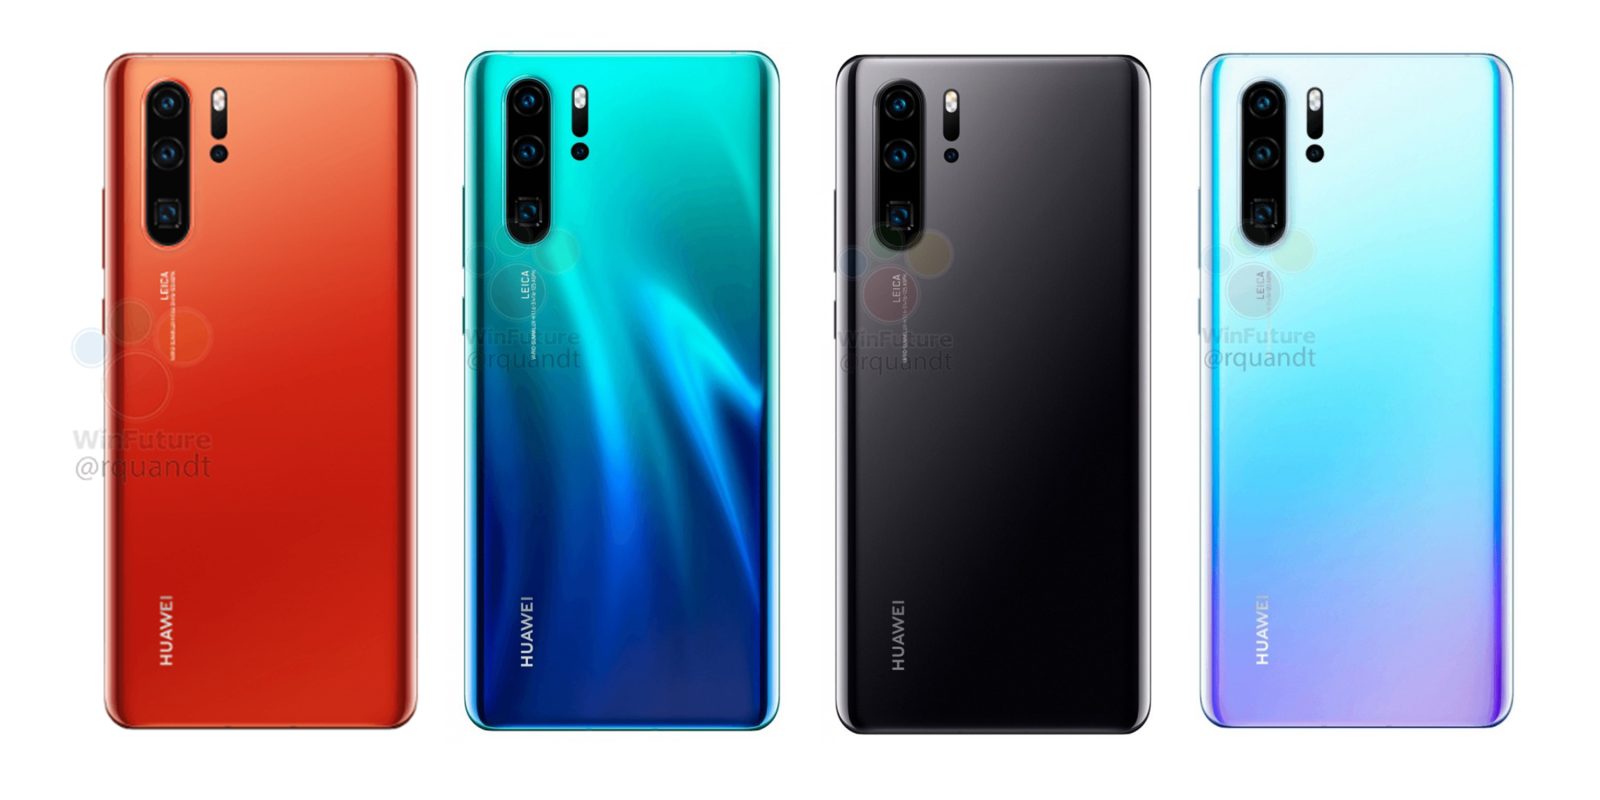 Huawei P30 Pro With Quad Camera And 50X Super ZOOM Launched In India